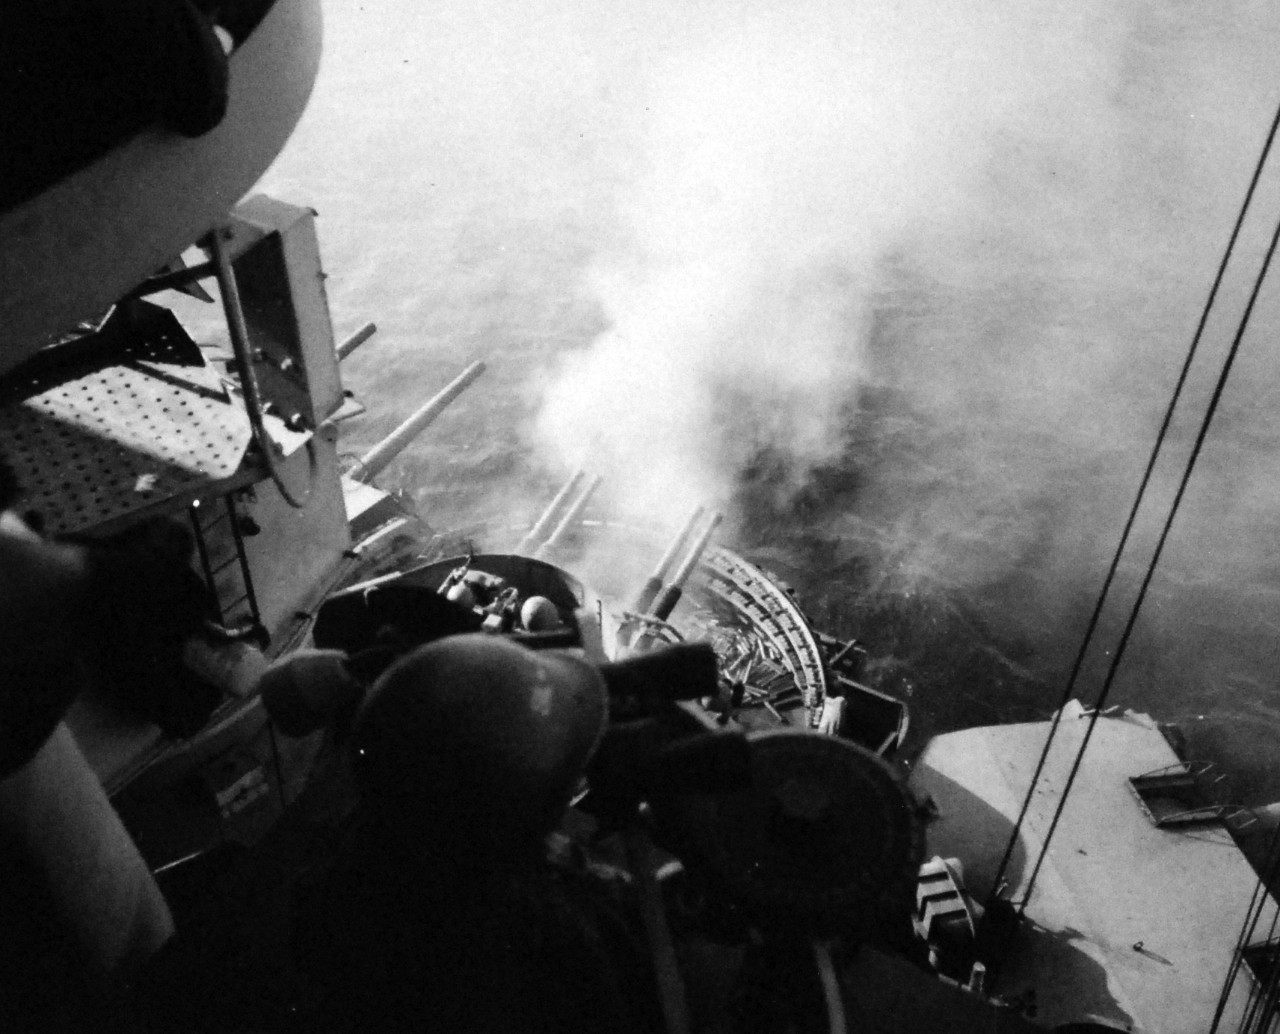 80-G-307121: Battle for Iwo Jima, February 17, 1945.  Shown:  Firing into cave on Mt. Suribachi by the 40 mm guns of USS Nevada (BB 36).  Photographed by USS Nevada (BB-36).  Official U.S. Navy photograph, now in the collections of the National Archives.  (2016/09/06).